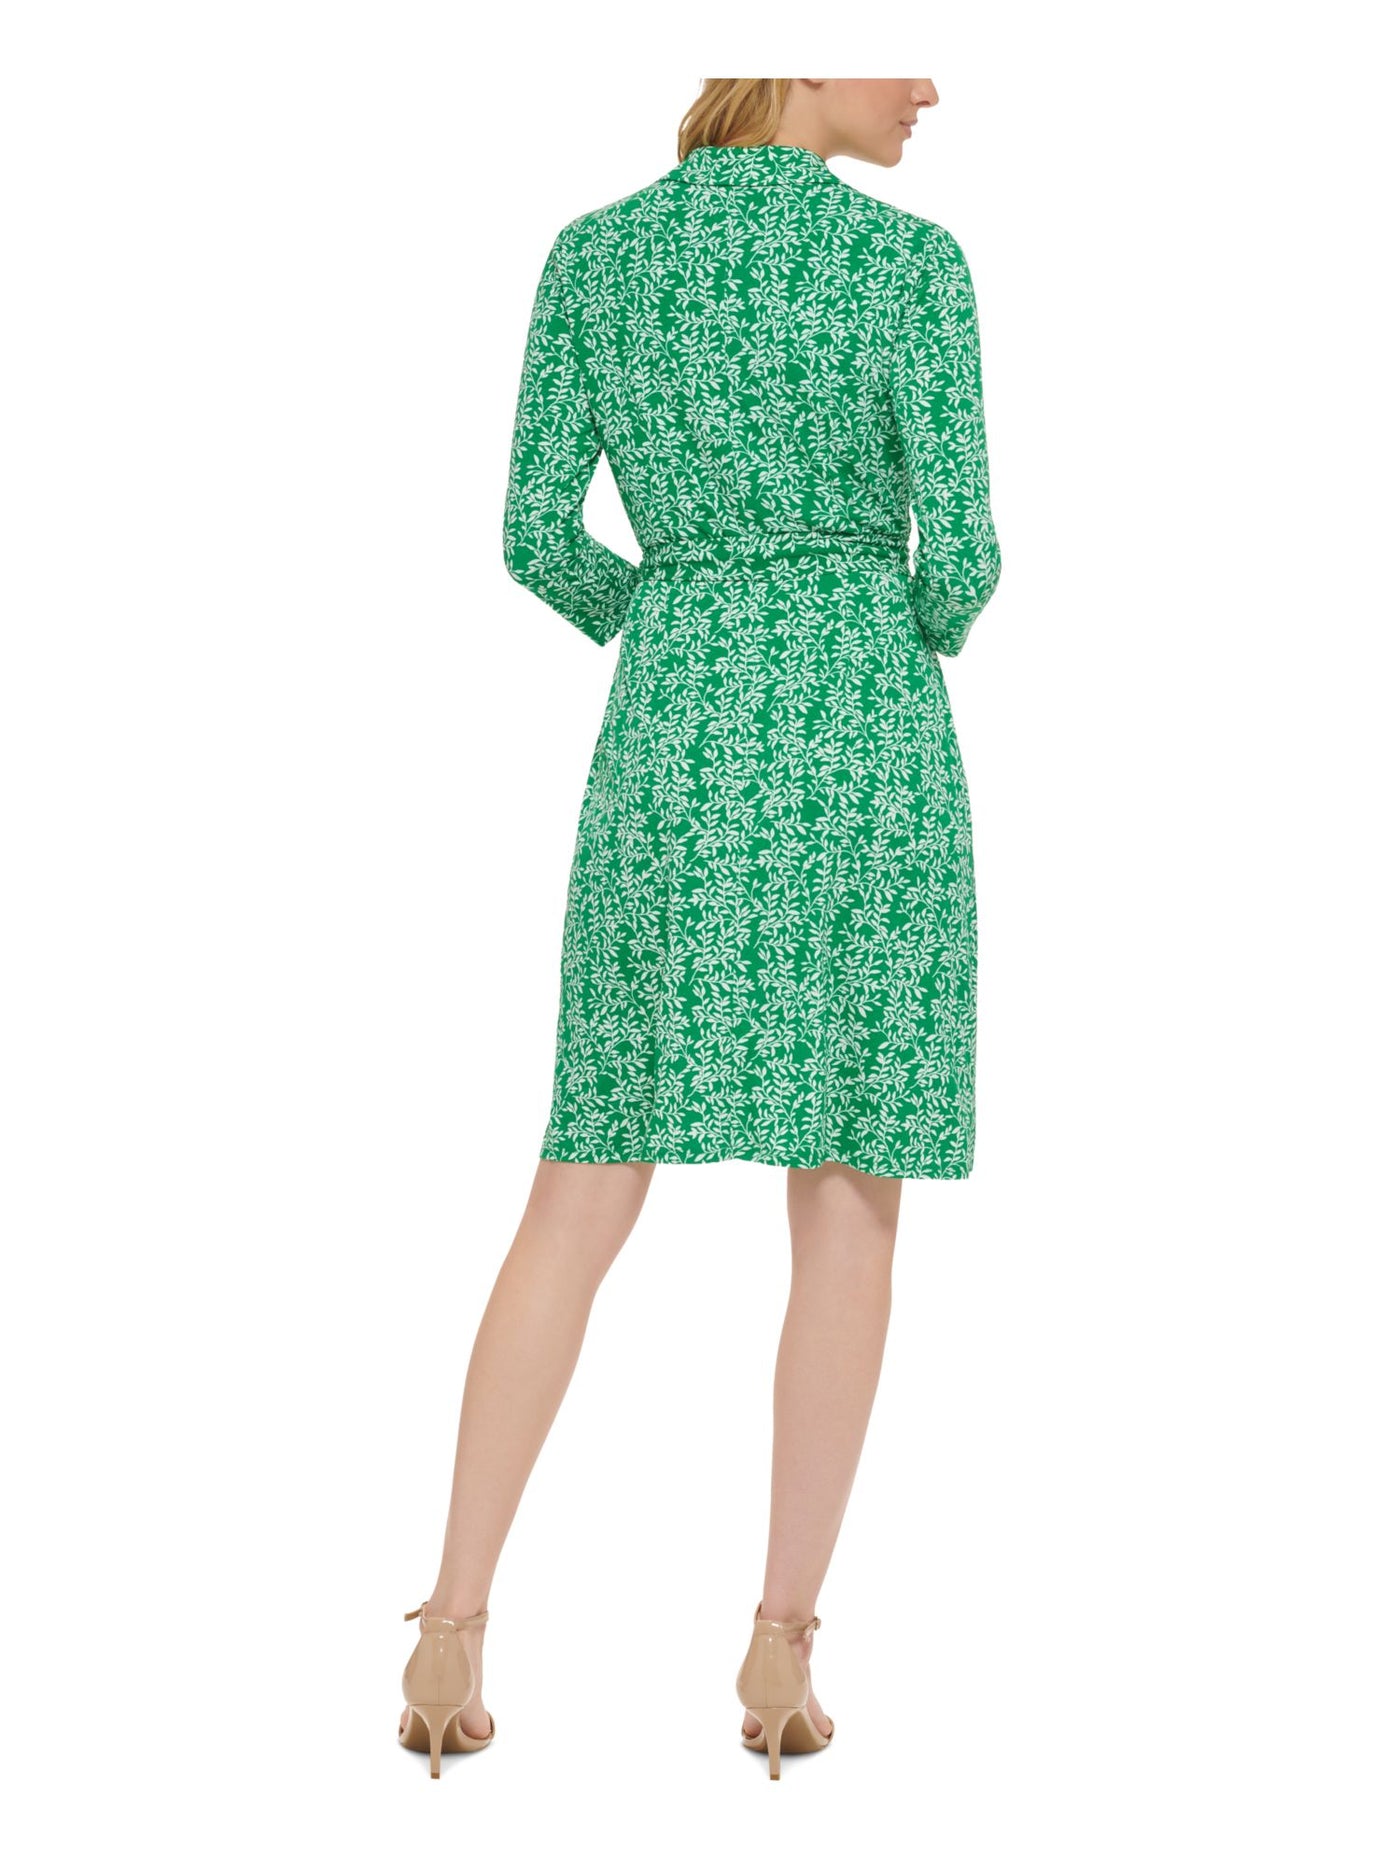 JESSICA HOWARD Womens Green Printed 3/4 Sleeve Point Collar Knee Length Wear To Work Faux Wrap Dress 16